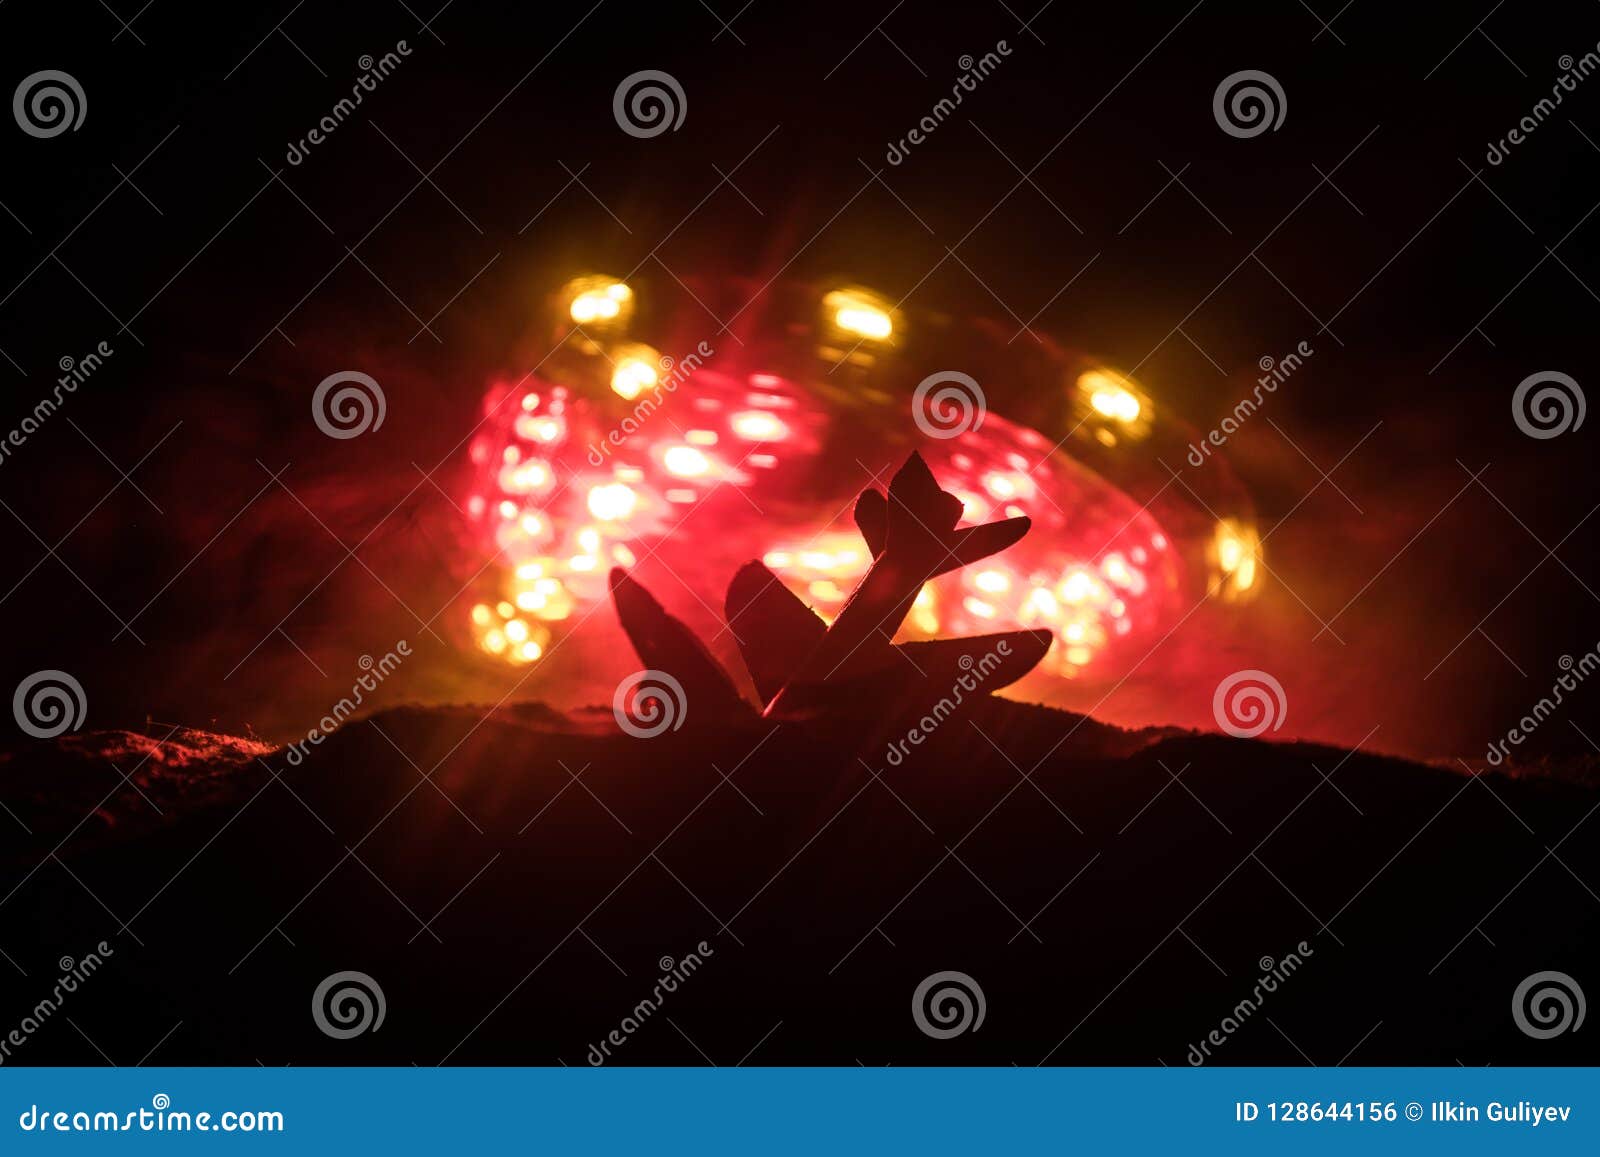 Air Crash. Burning Falling Plane. The Plane Crashed To The Ground. Decorated With Toy At Dark ...